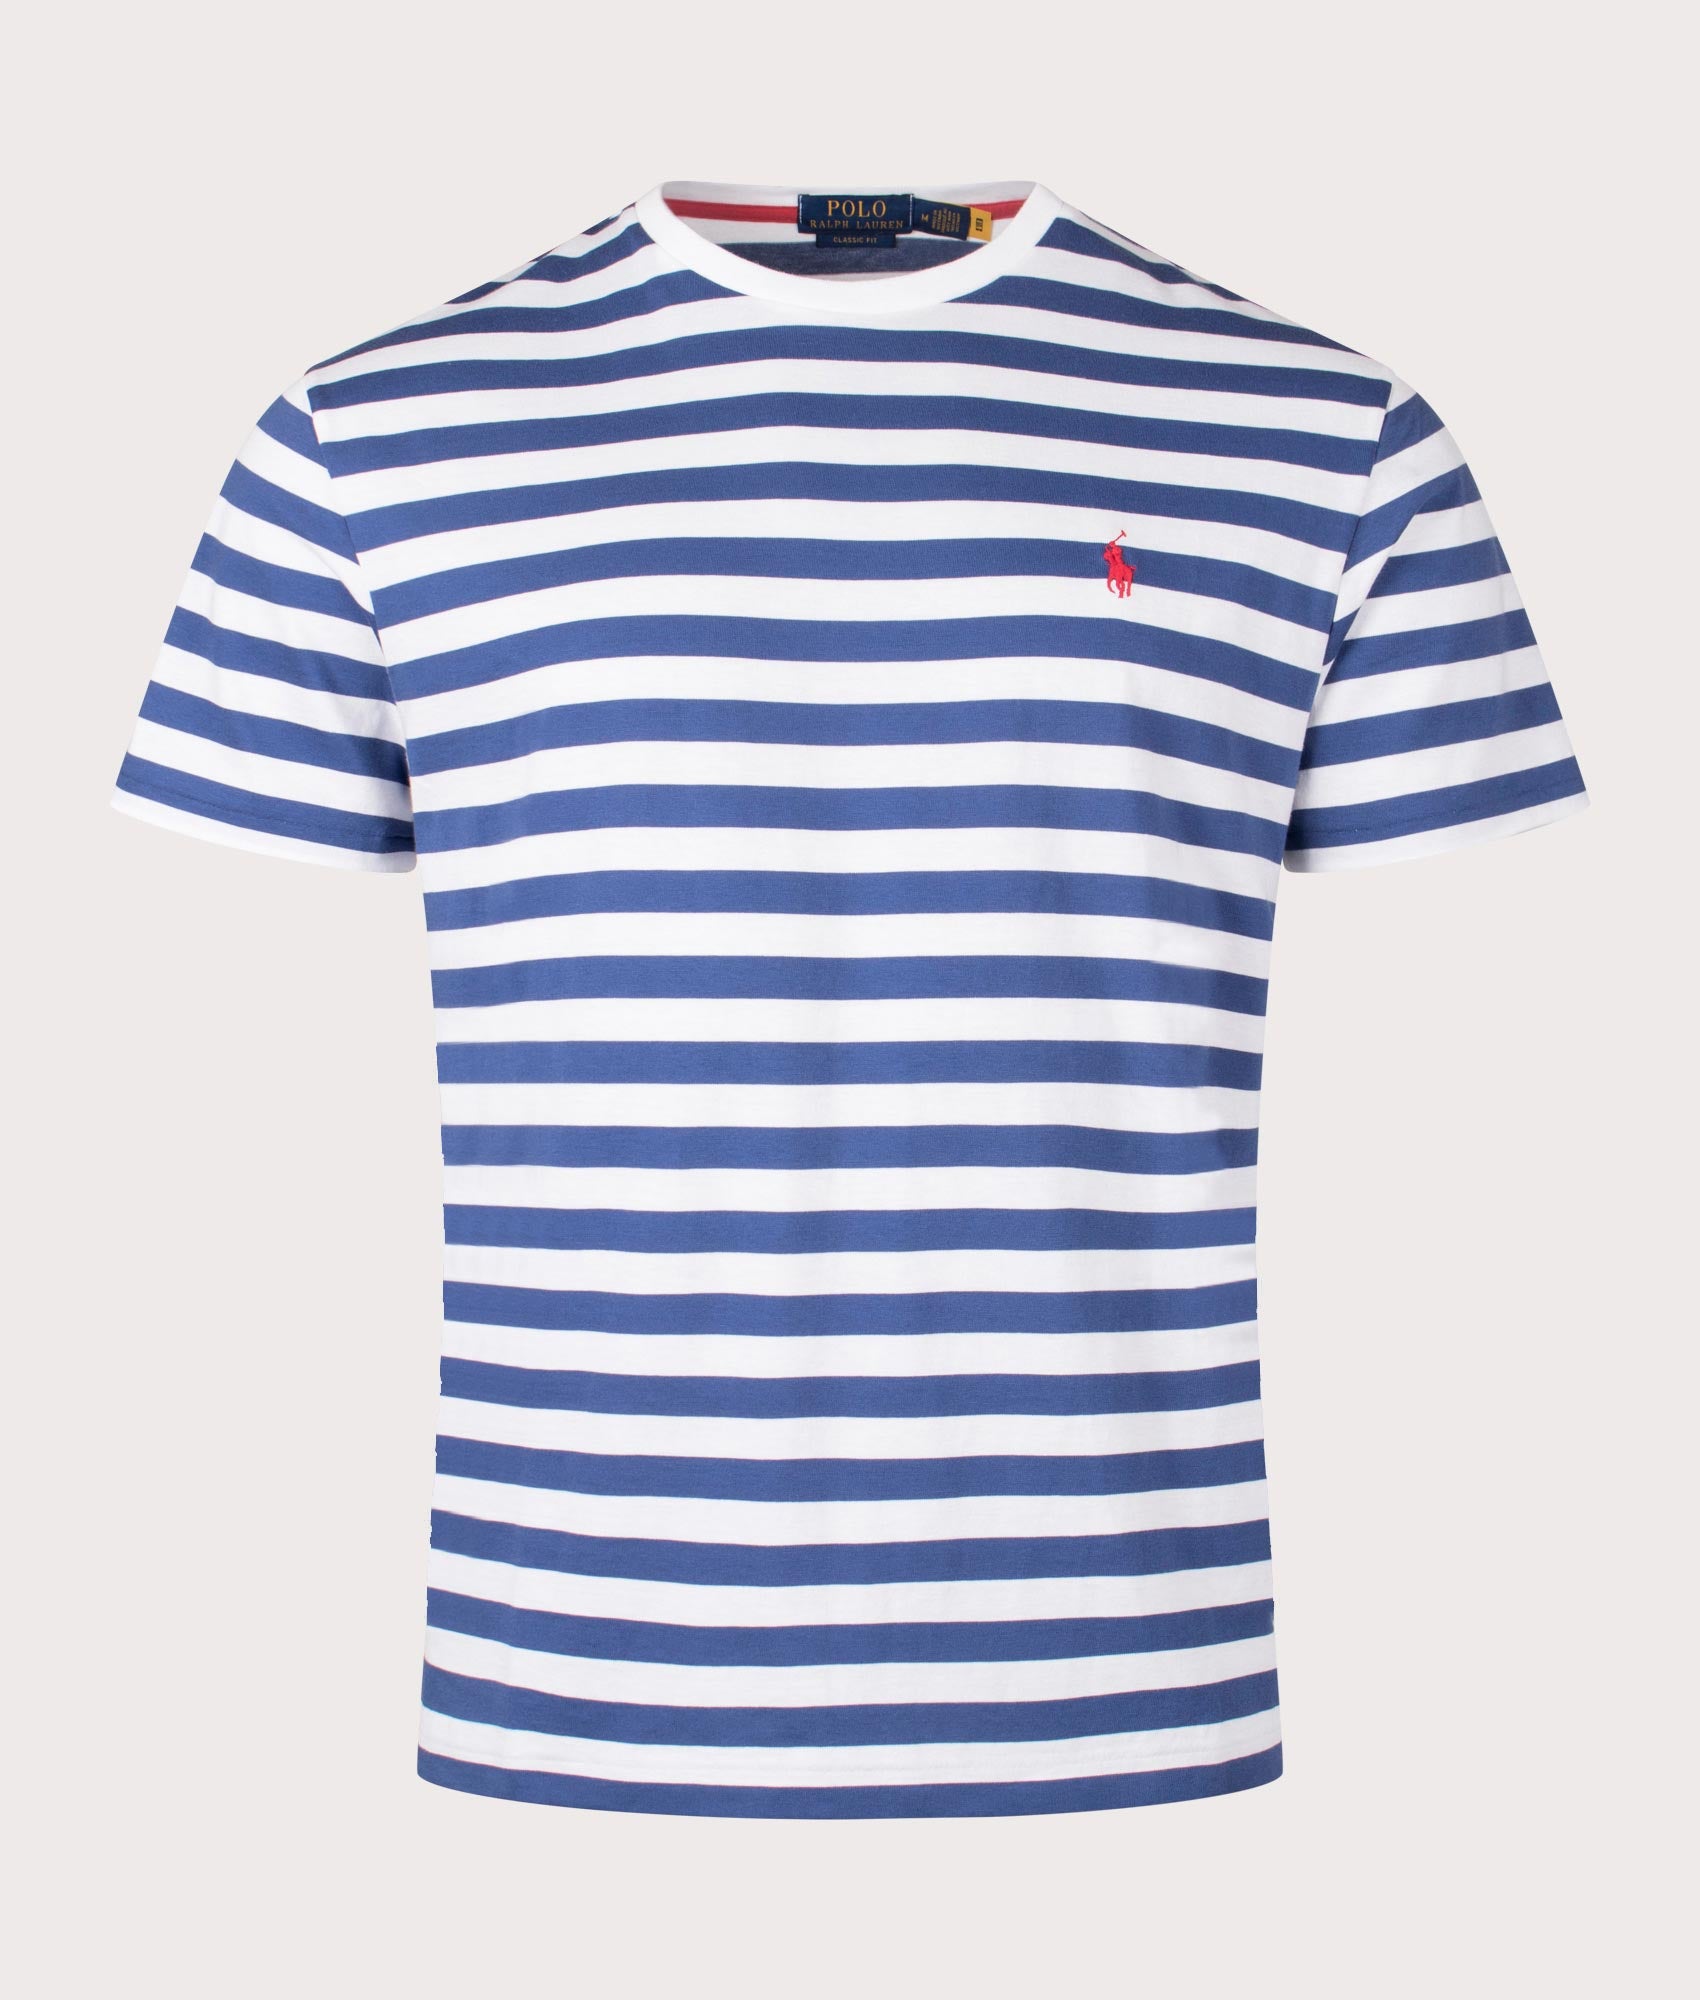 Polo Ralph Lauren Mens Classic Fit Striped Jersey T-Shirt - Colour: 001 Old Royal/White - Size: XL